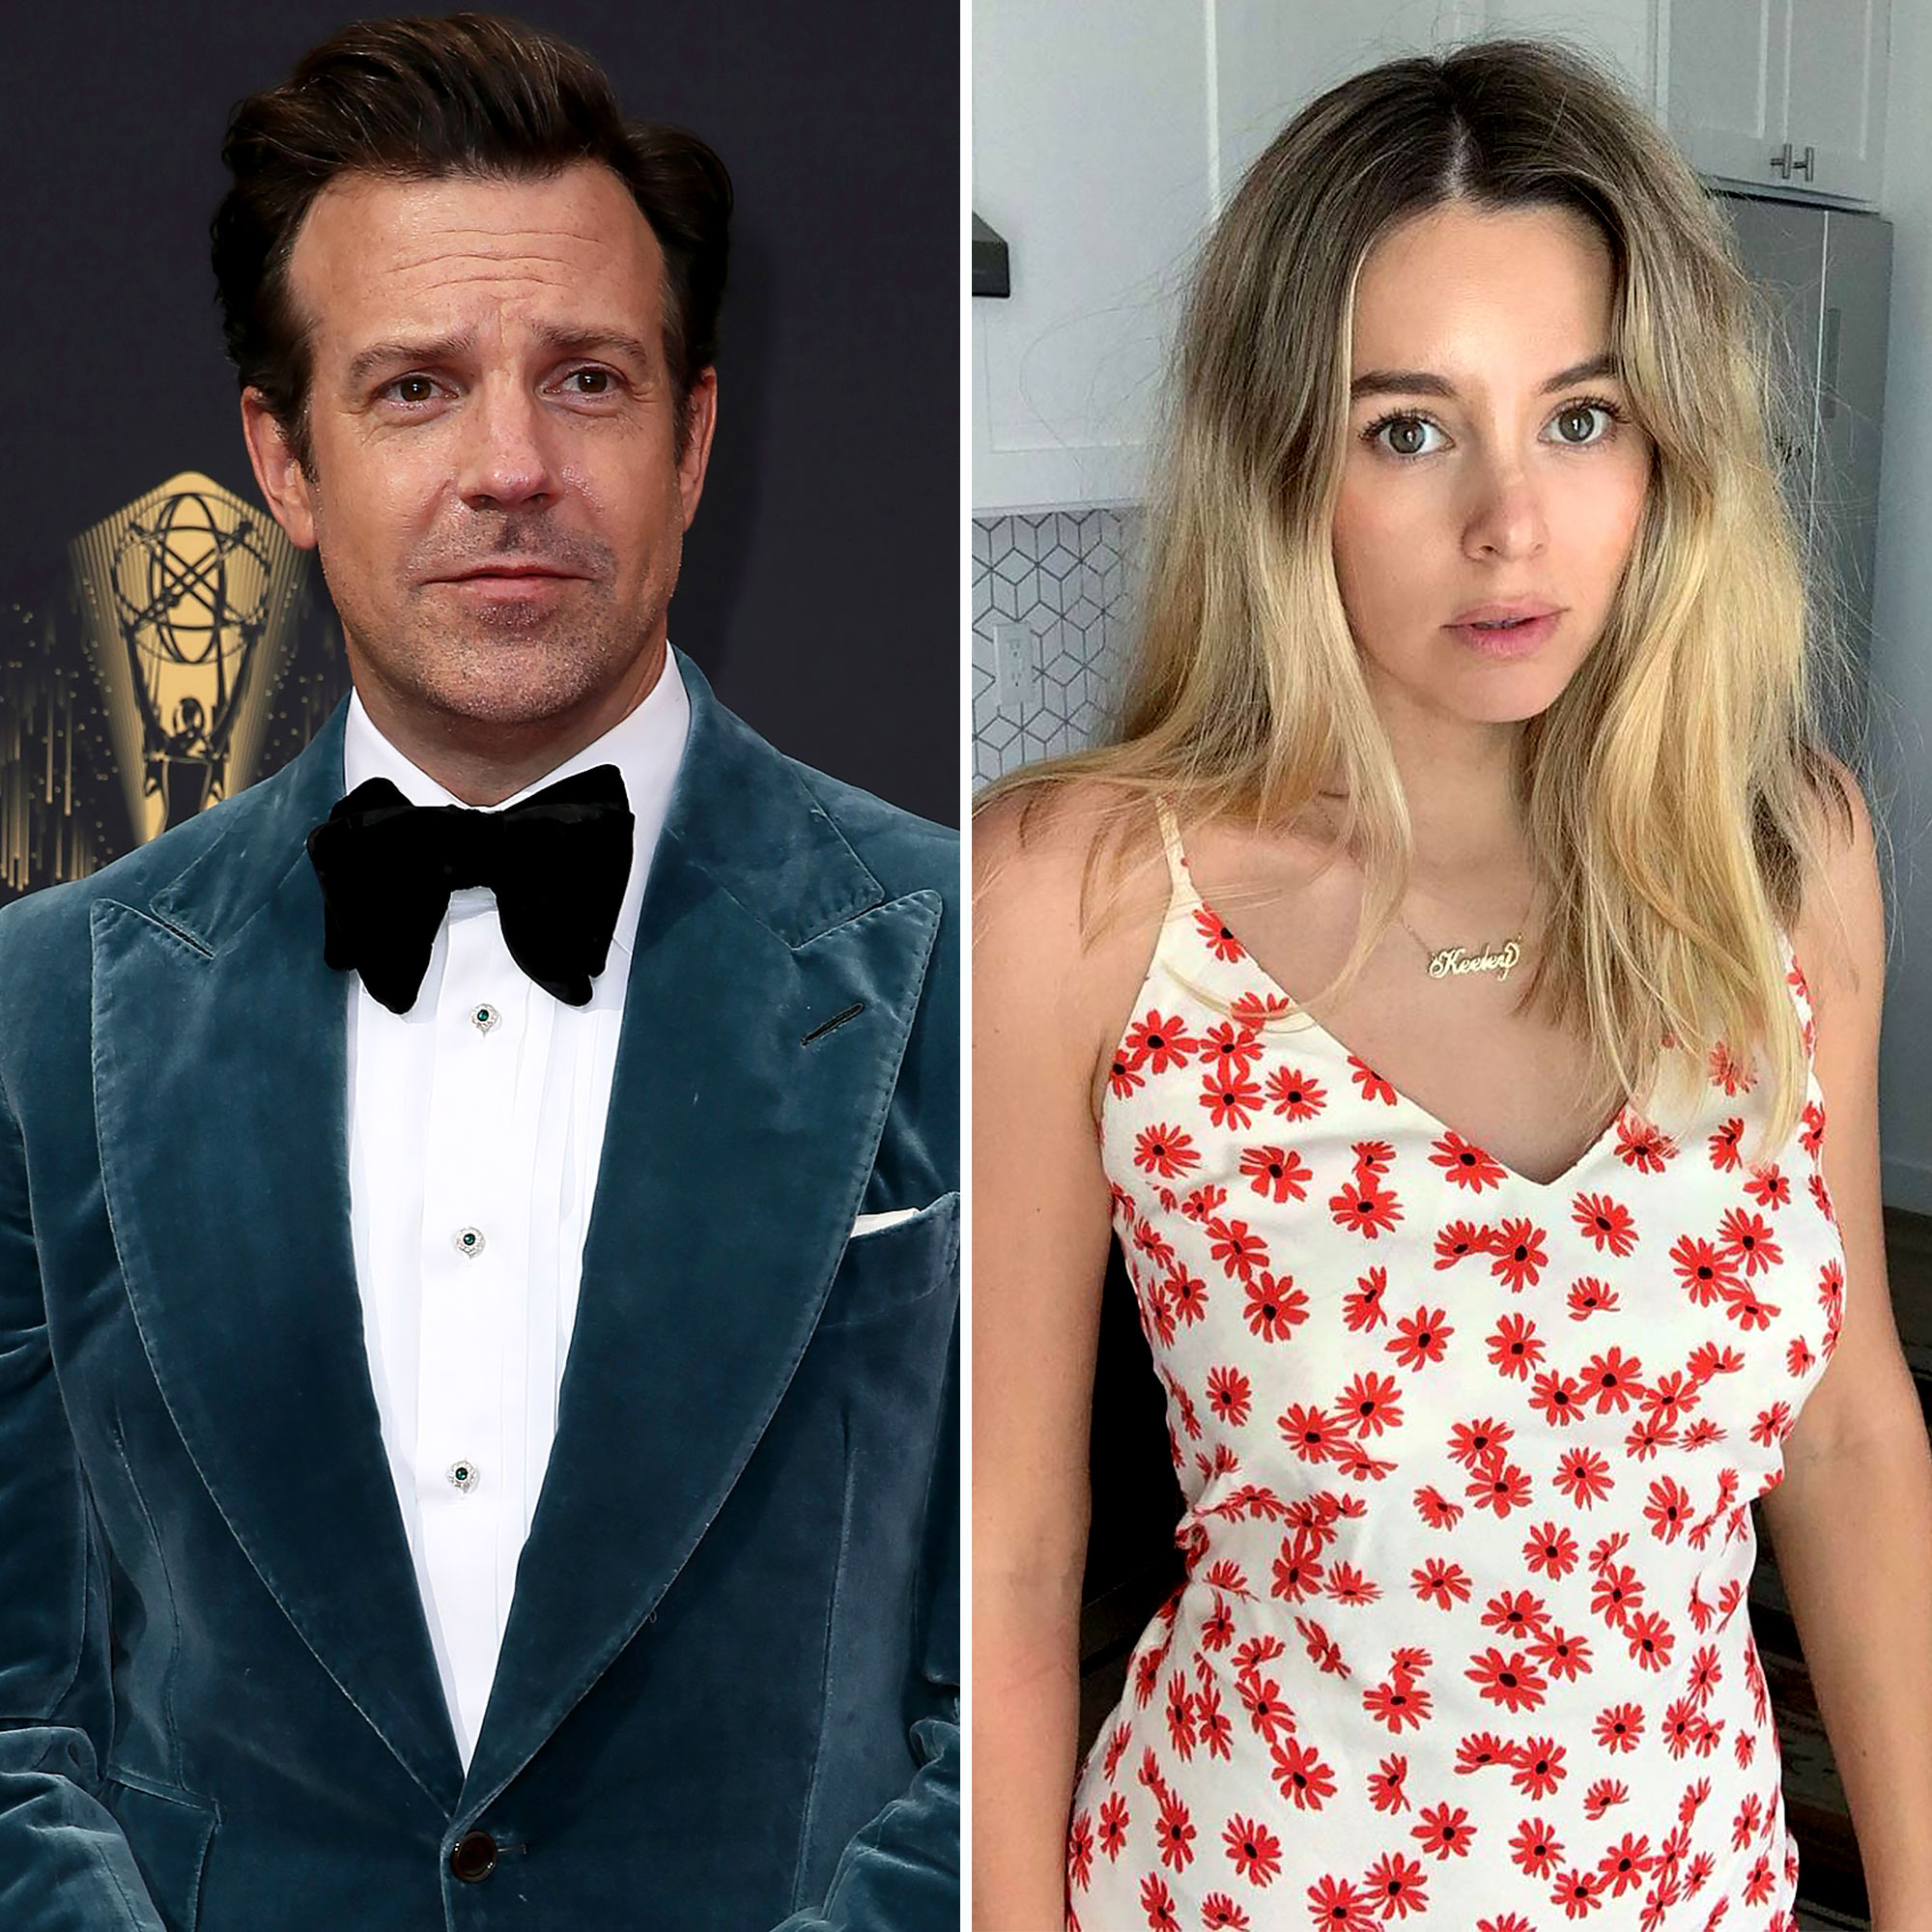 Jason Sudeikis Spotted Kissing Model Keeley Hazell in Mexico